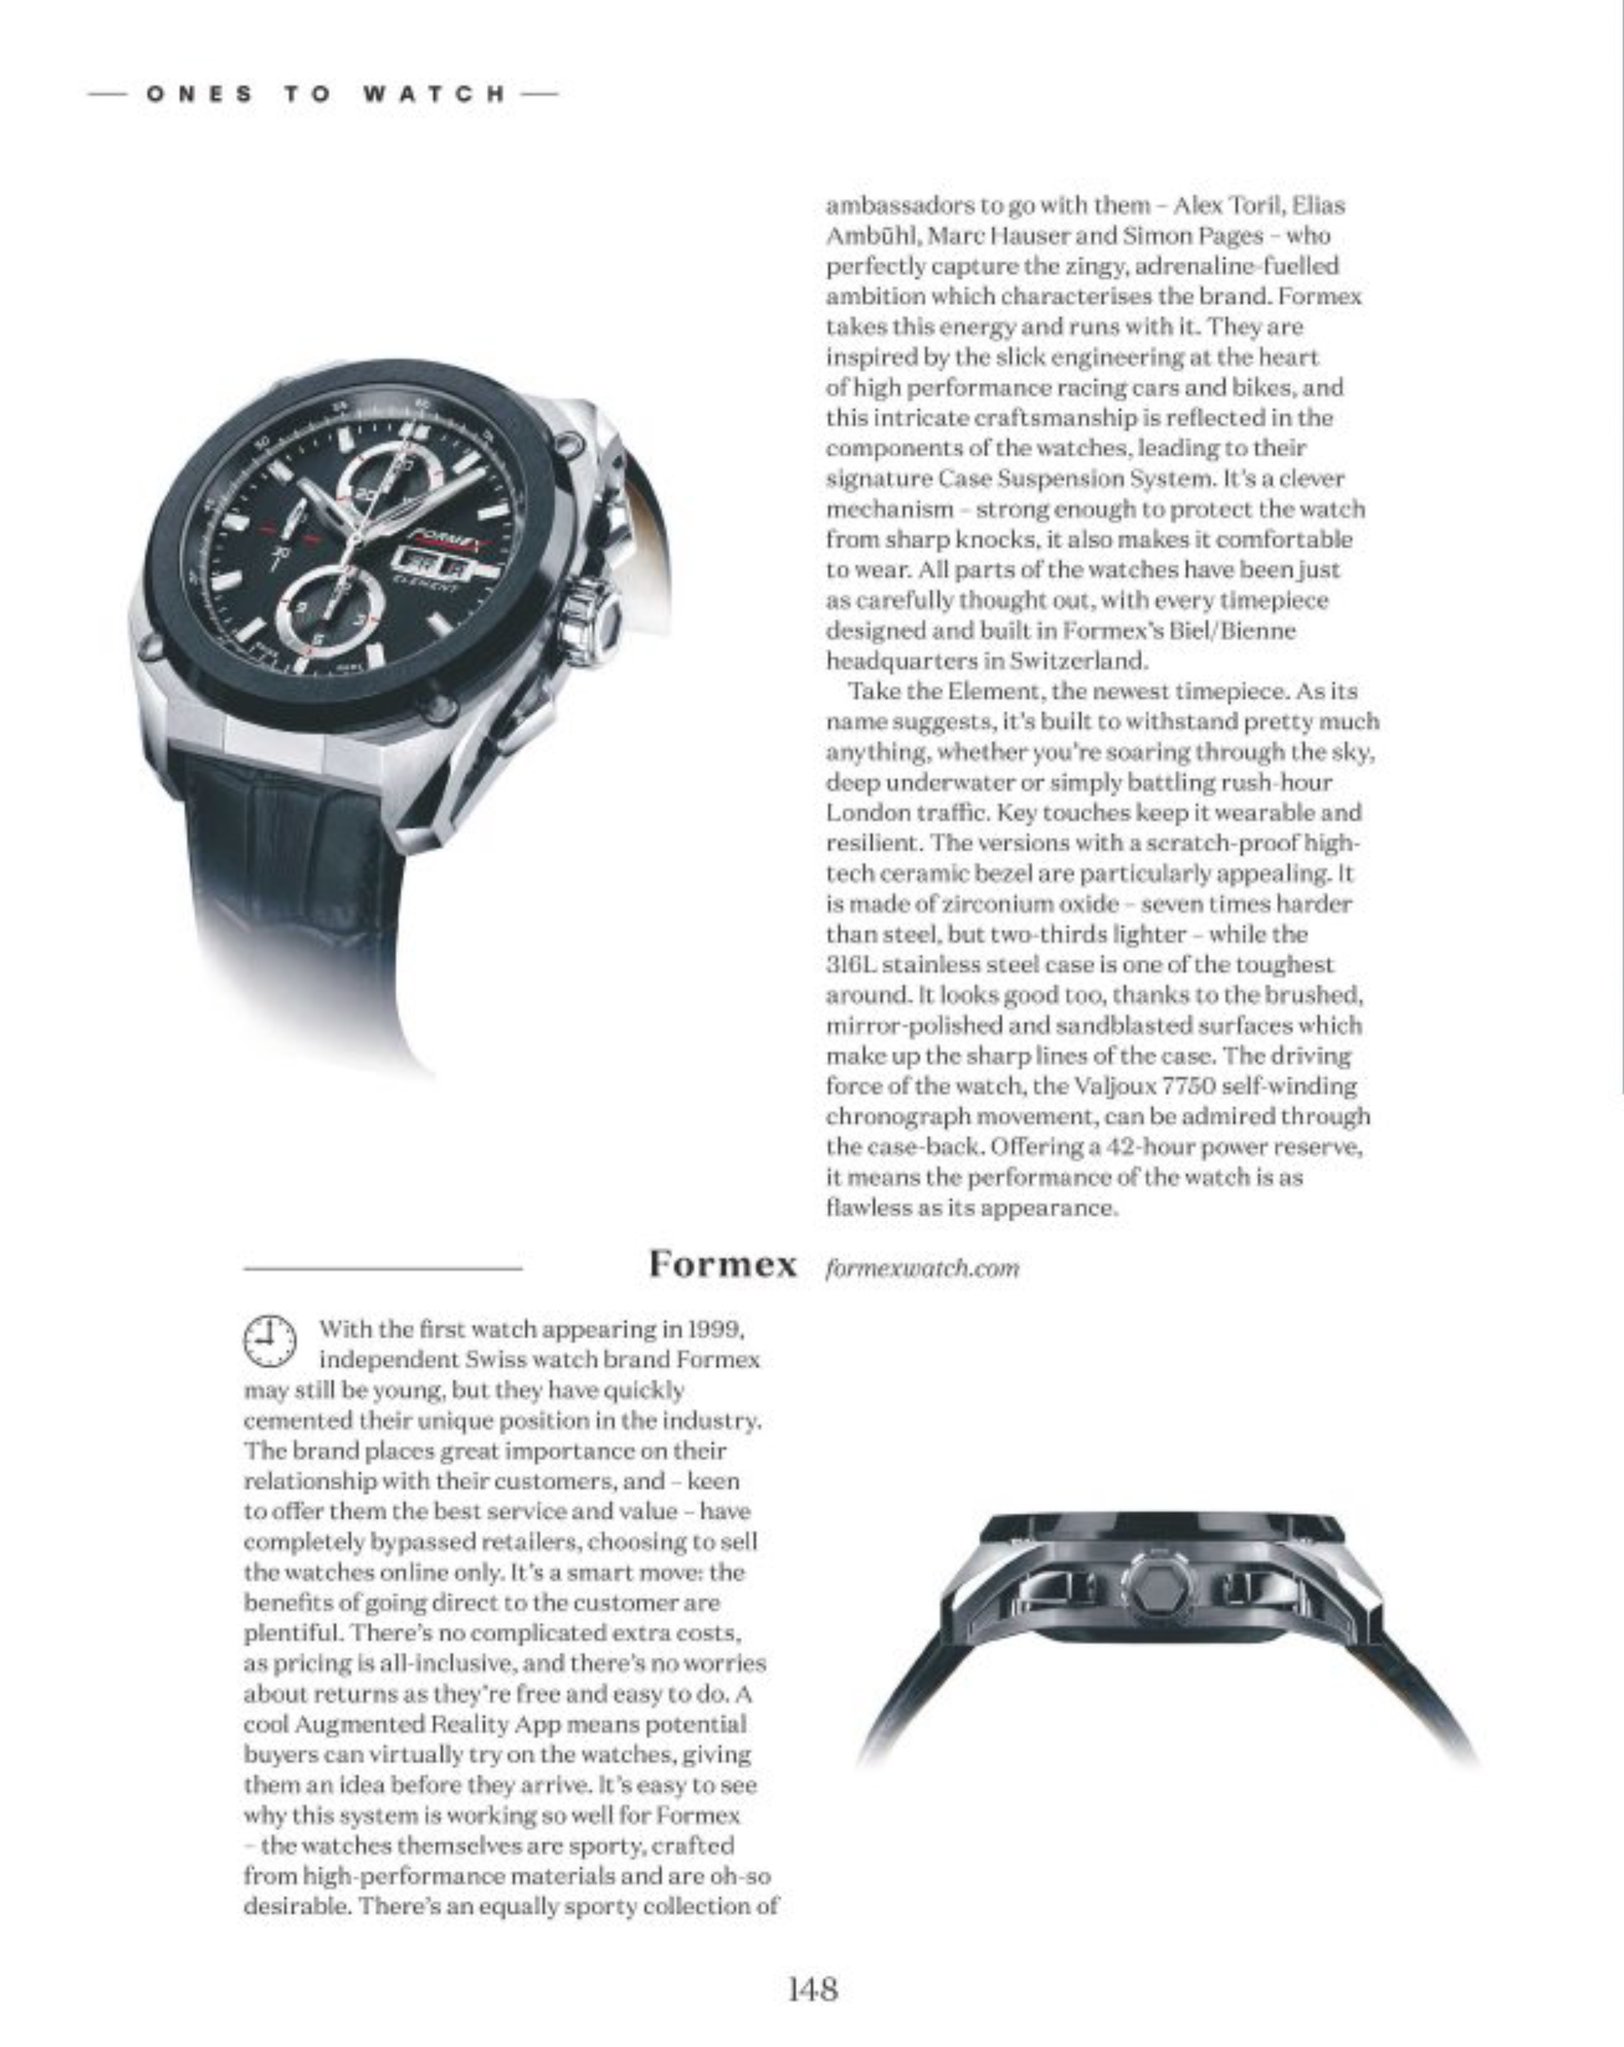 Oracle of Time: In Focus: Features Formex Swiss Watch